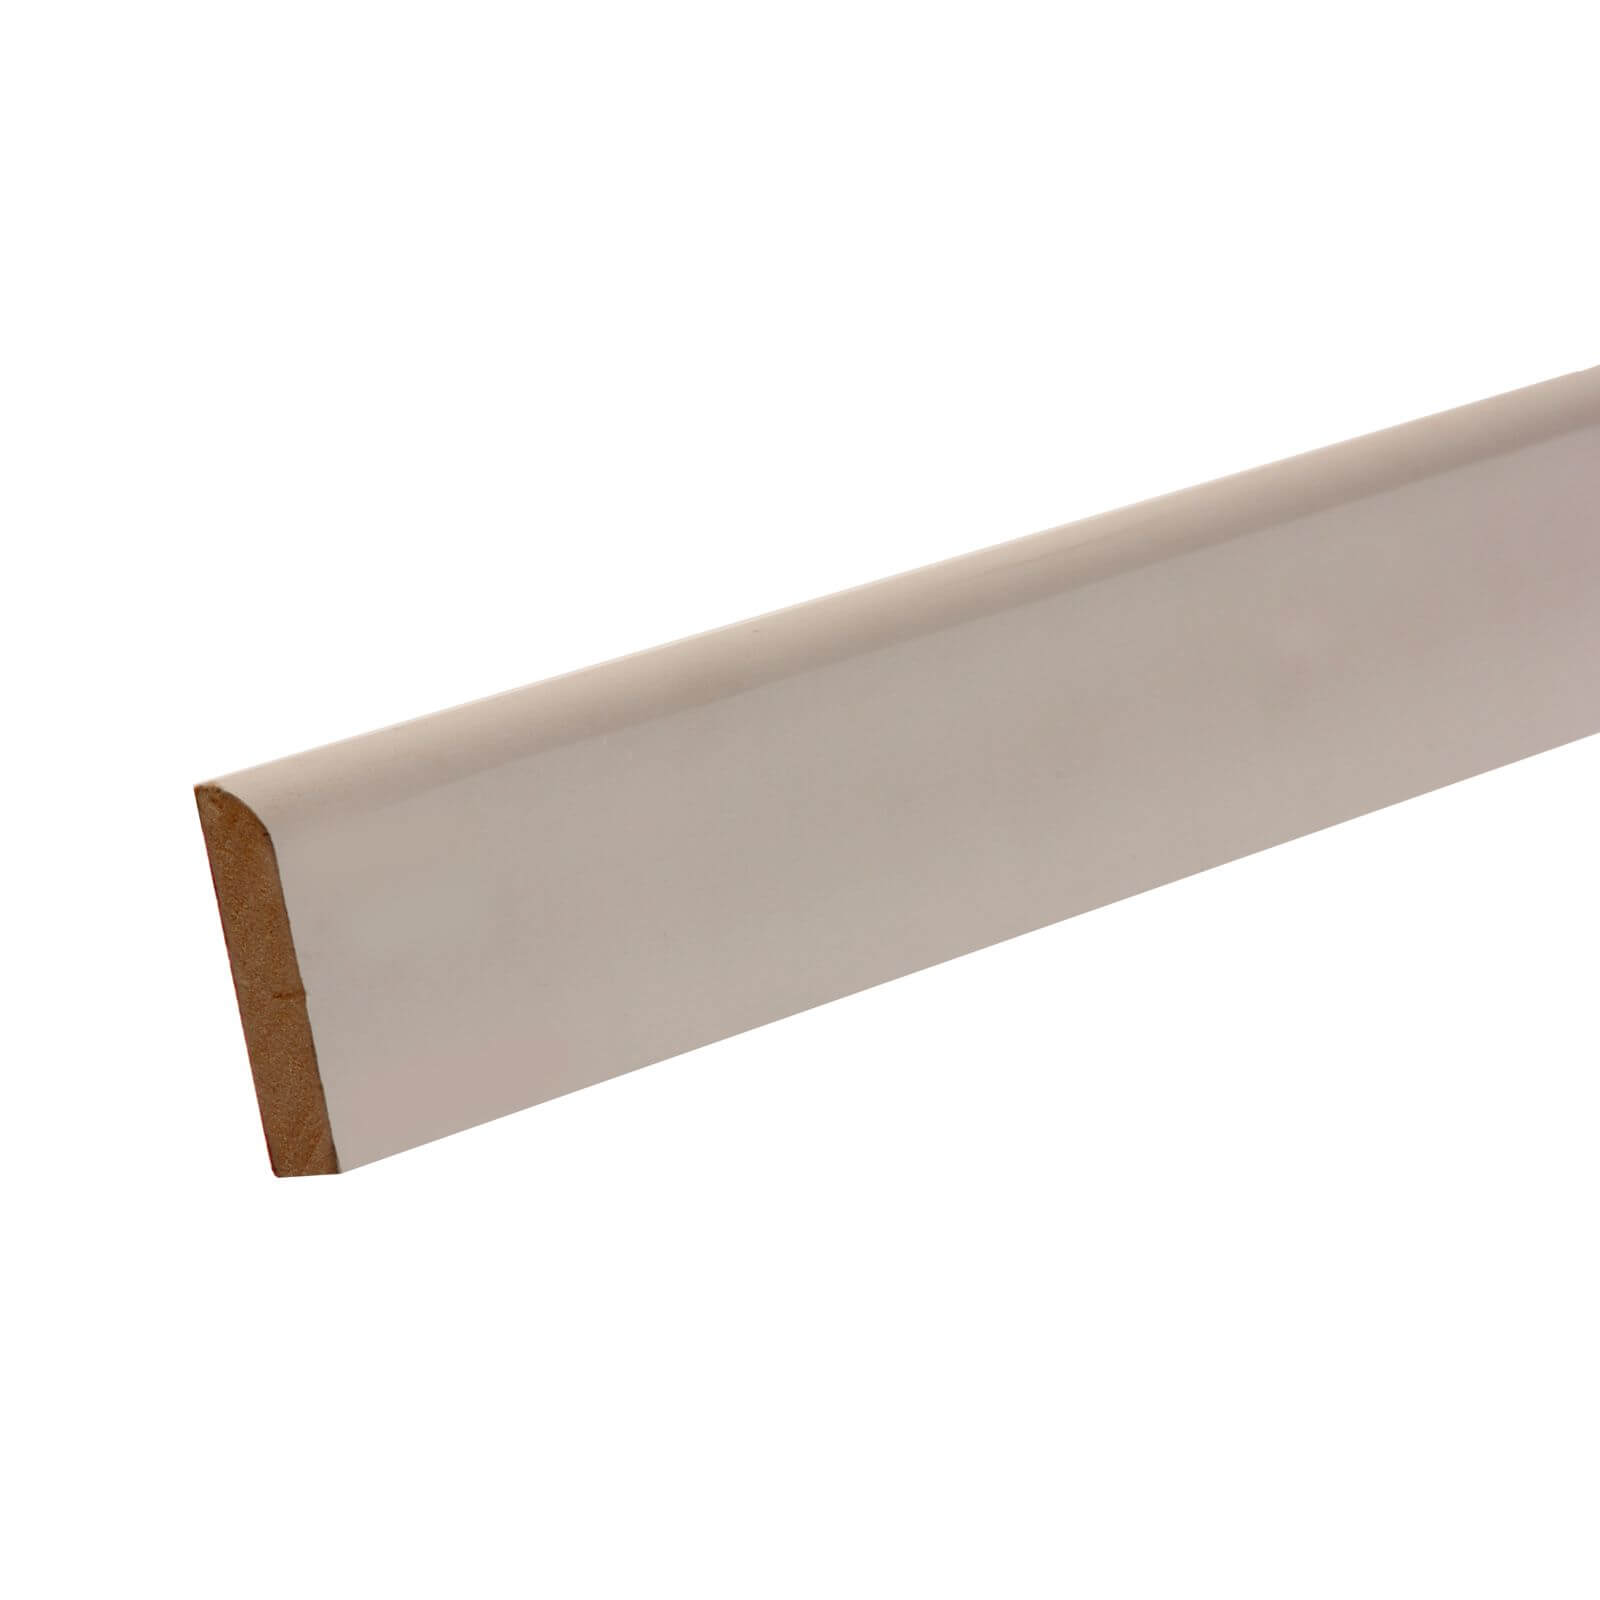 Photo of Mdf Pmd Large Round Architrave 14.5 X 69mm X 2.1m